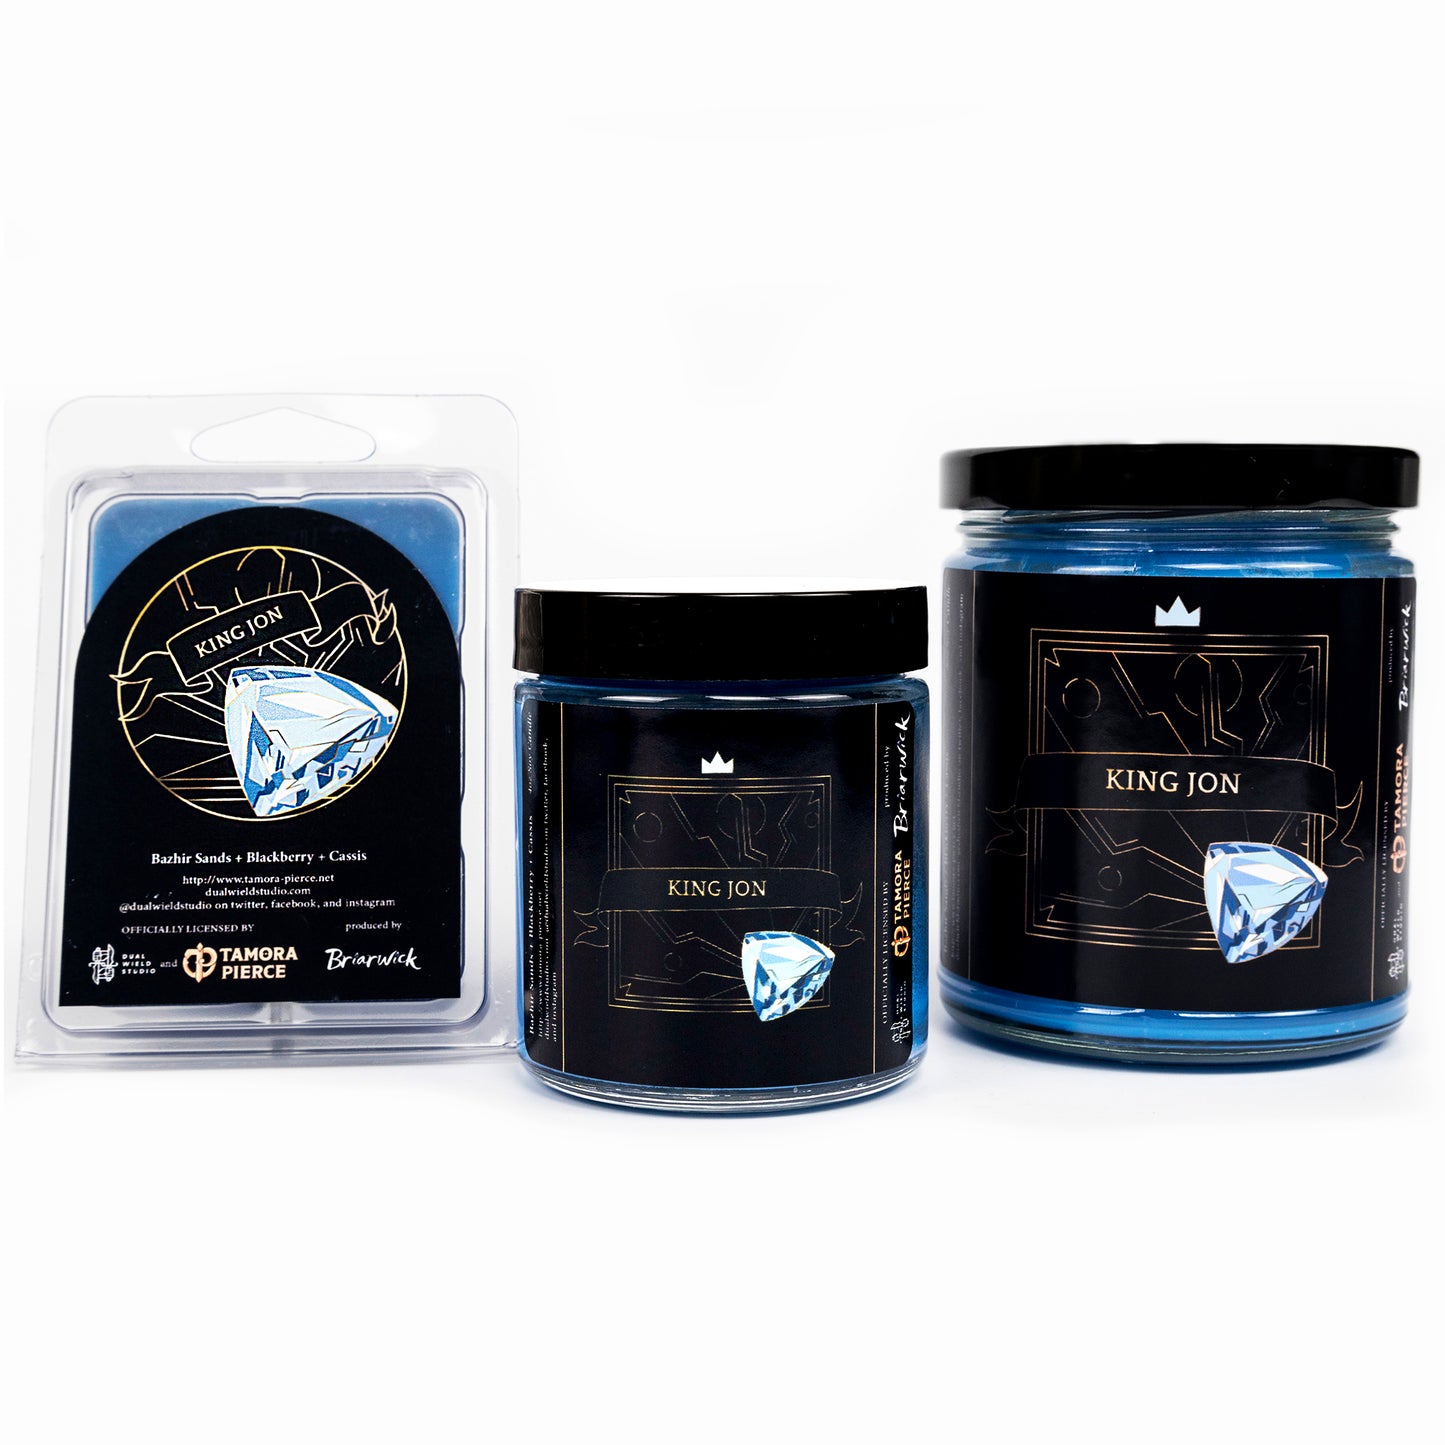 Full set of both King Jon candles and wax melts, all with blue wax. The label illustration depicts a shining blue jem. "King Jon" is written across a centered ribbon.